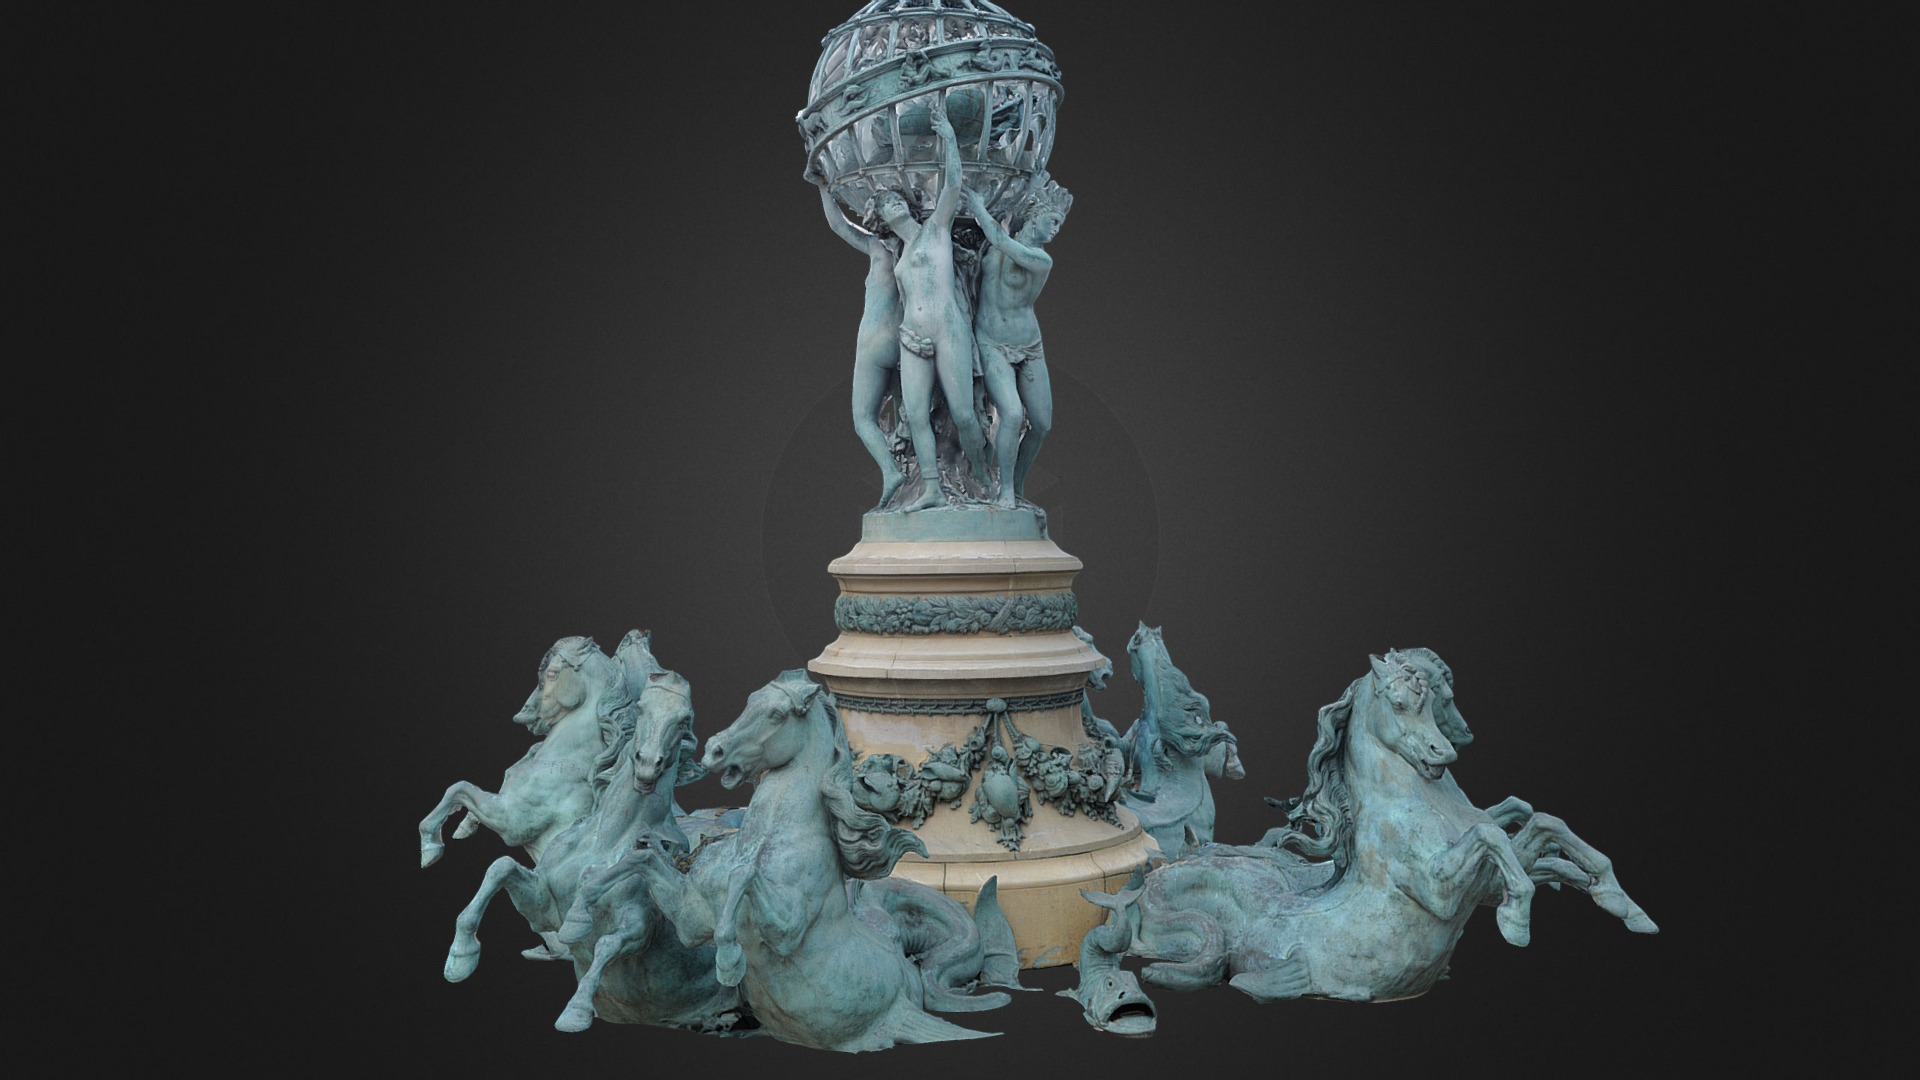 3D model Four-parts-of-the-world Fountain - This is a 3D model of the Four-parts-of-the-world Fountain. The 3D model is about a statue of a person riding a horse.